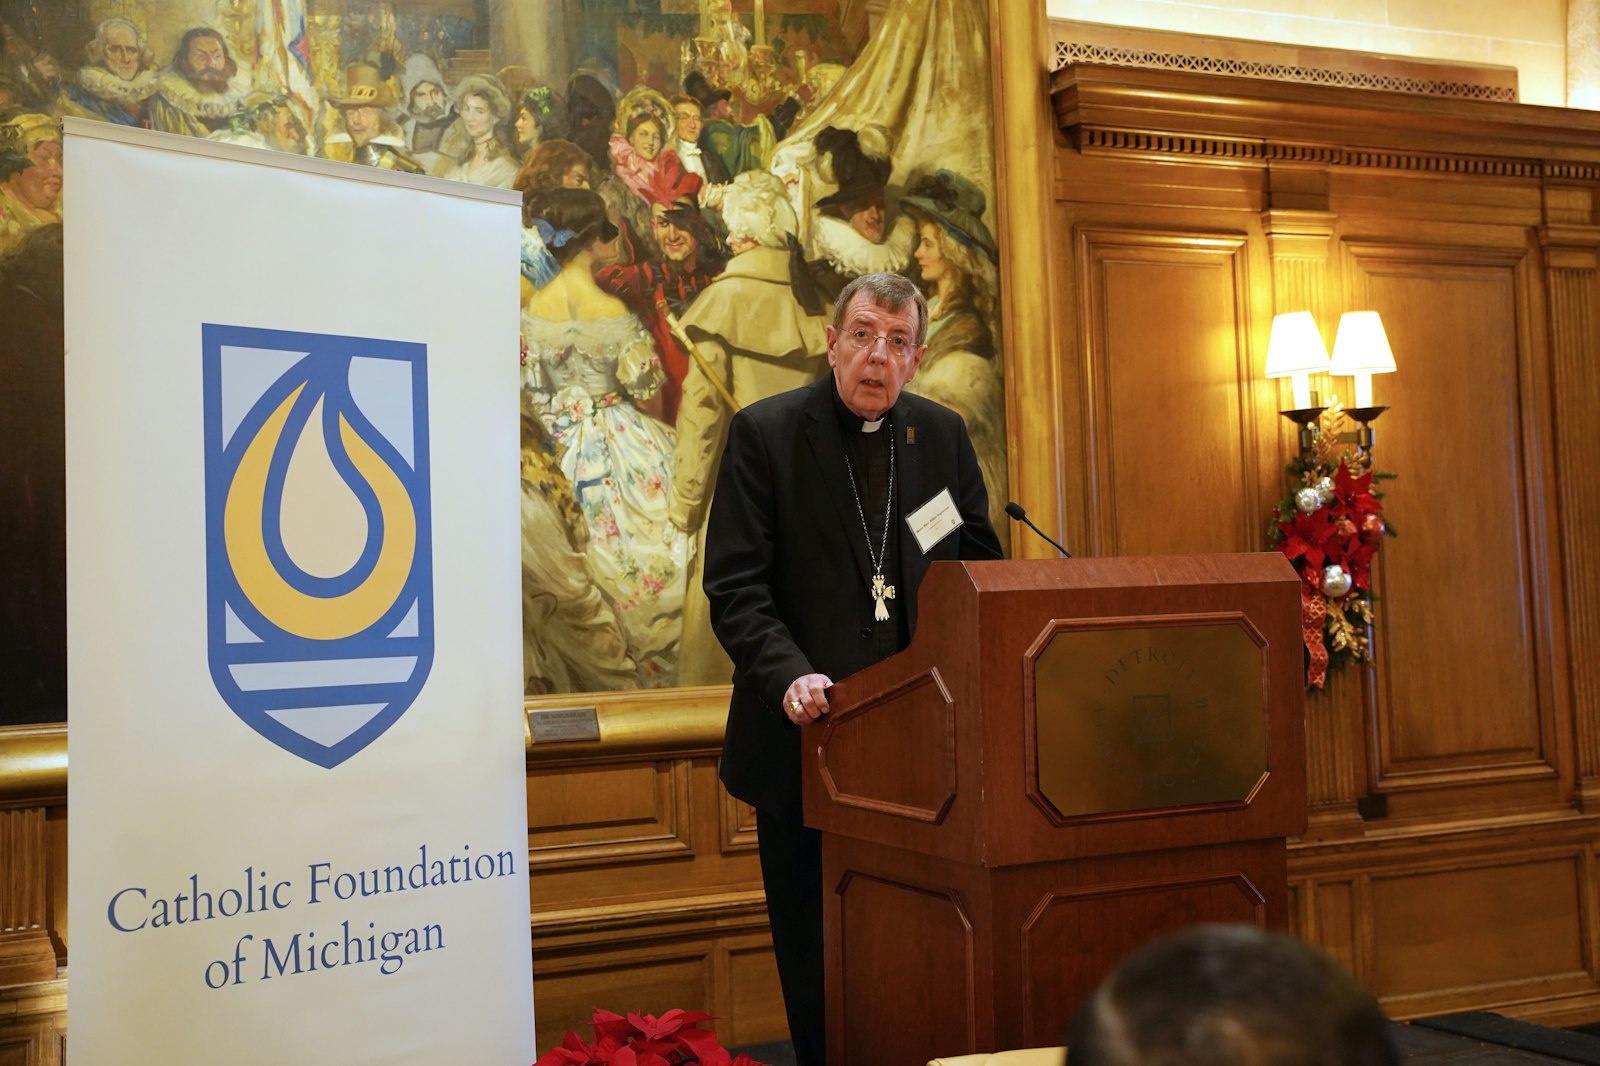 Detroit Archbishop Allen H. Vigneron thanks the donors who gave through the Catholic Foundation of Michigan, assuring them their contributions are a continuation of the Acts of the Apostles.